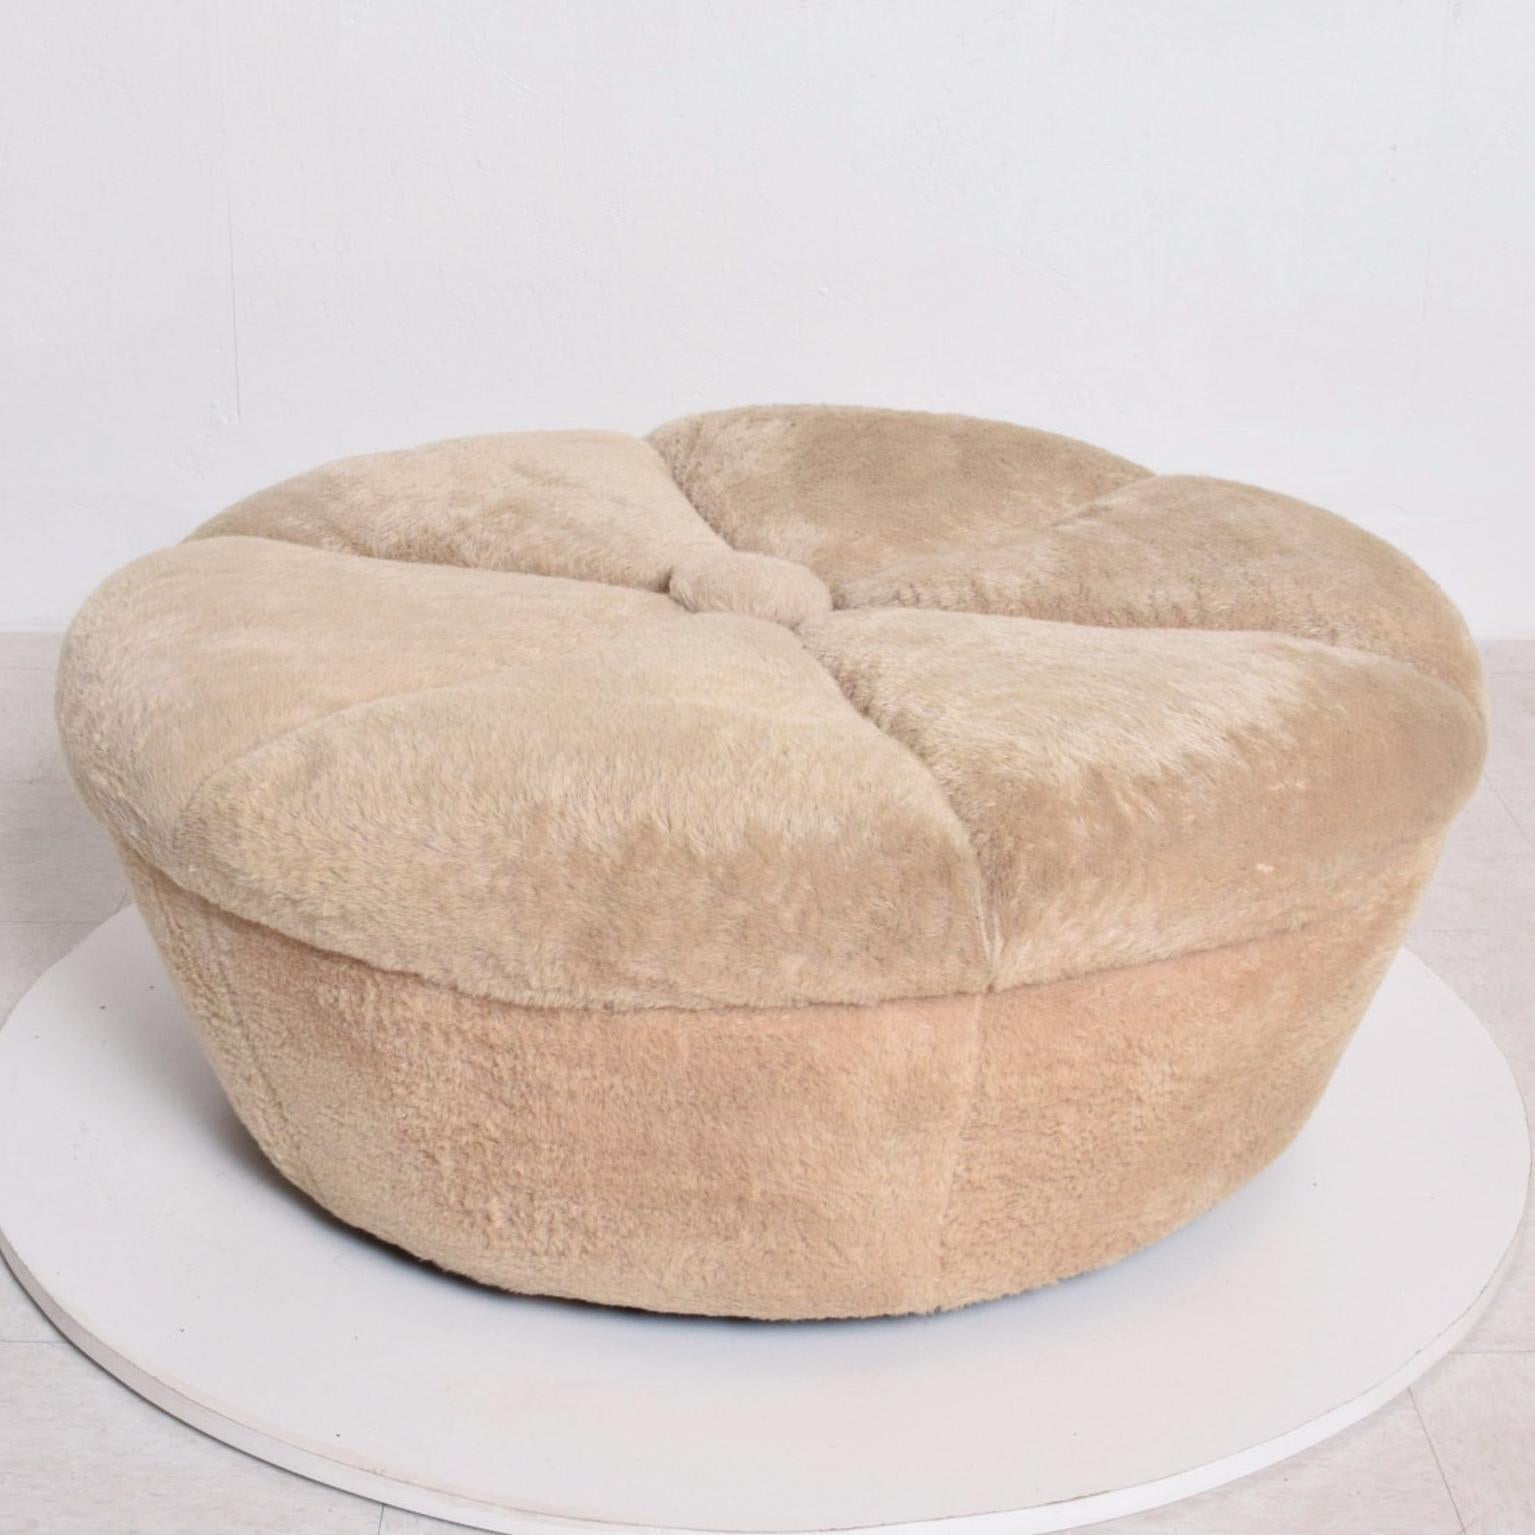 Pouf
Hollywood Regency Round Sectional Ottoman Pouf Stool after Billy Haines
Classic Mid Century Tufted design 1950s
Dimensions: 36 in diameter x 15 height. 
Original vintage unrestored condition. Refer to images. Original upholstery. Upholstery has